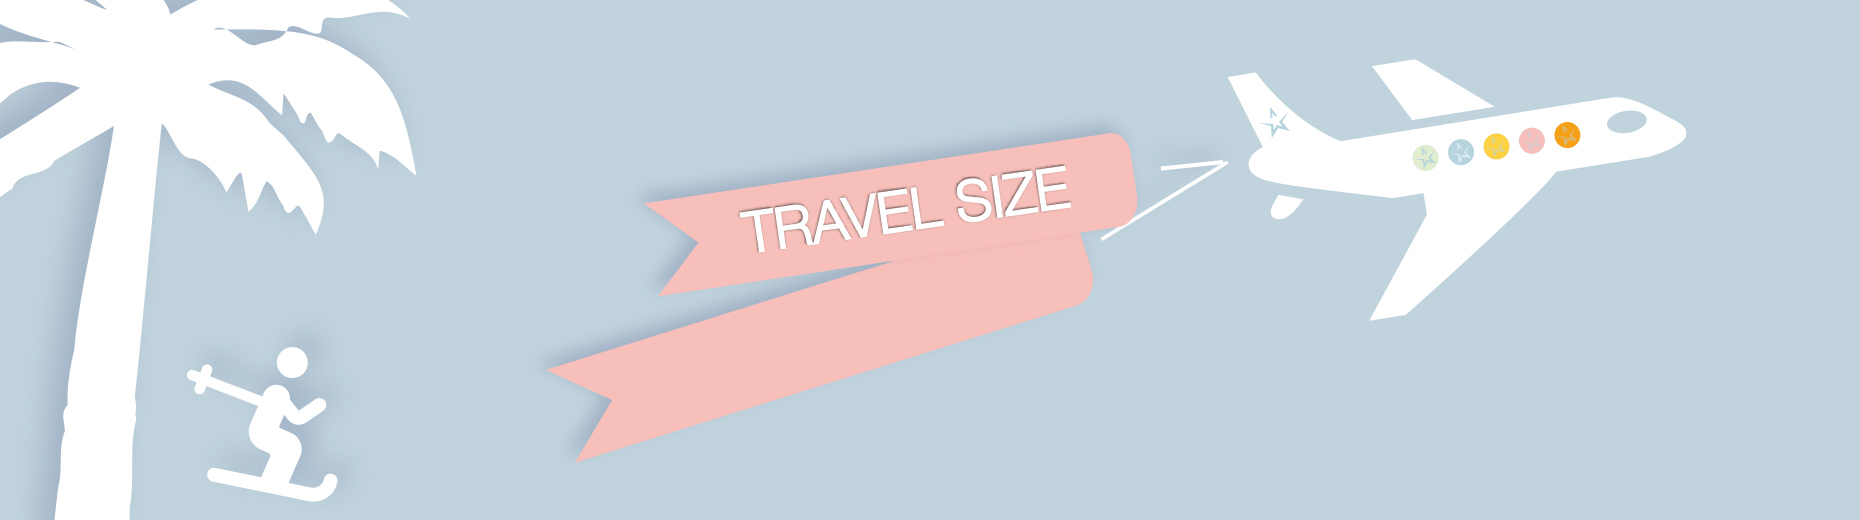 banner travelsize collection with plane winter and summer holiday